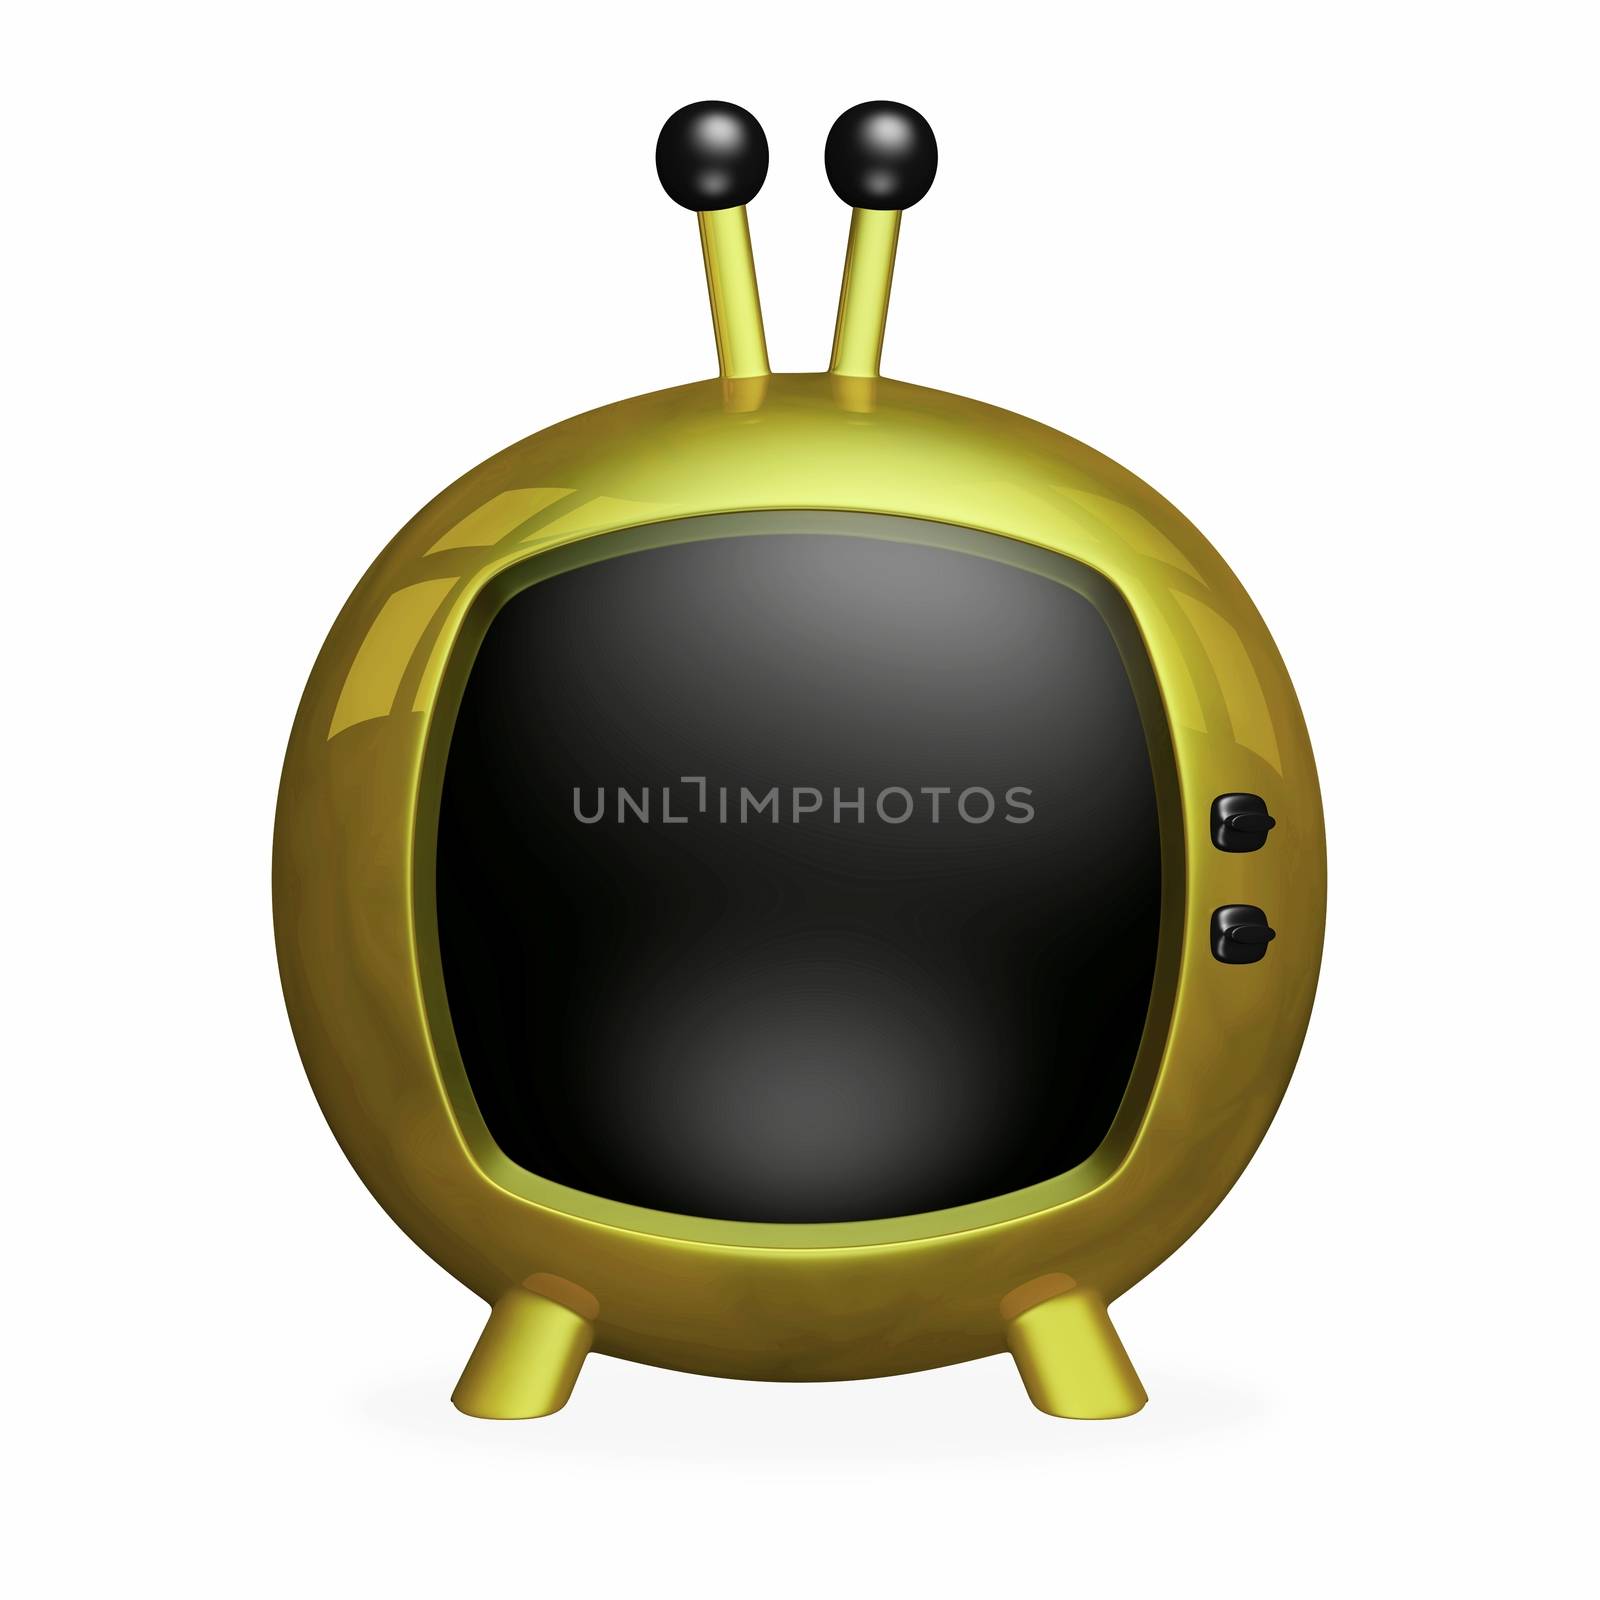 Gold Cartoon 3D TV with Black Screen by RichieThakur